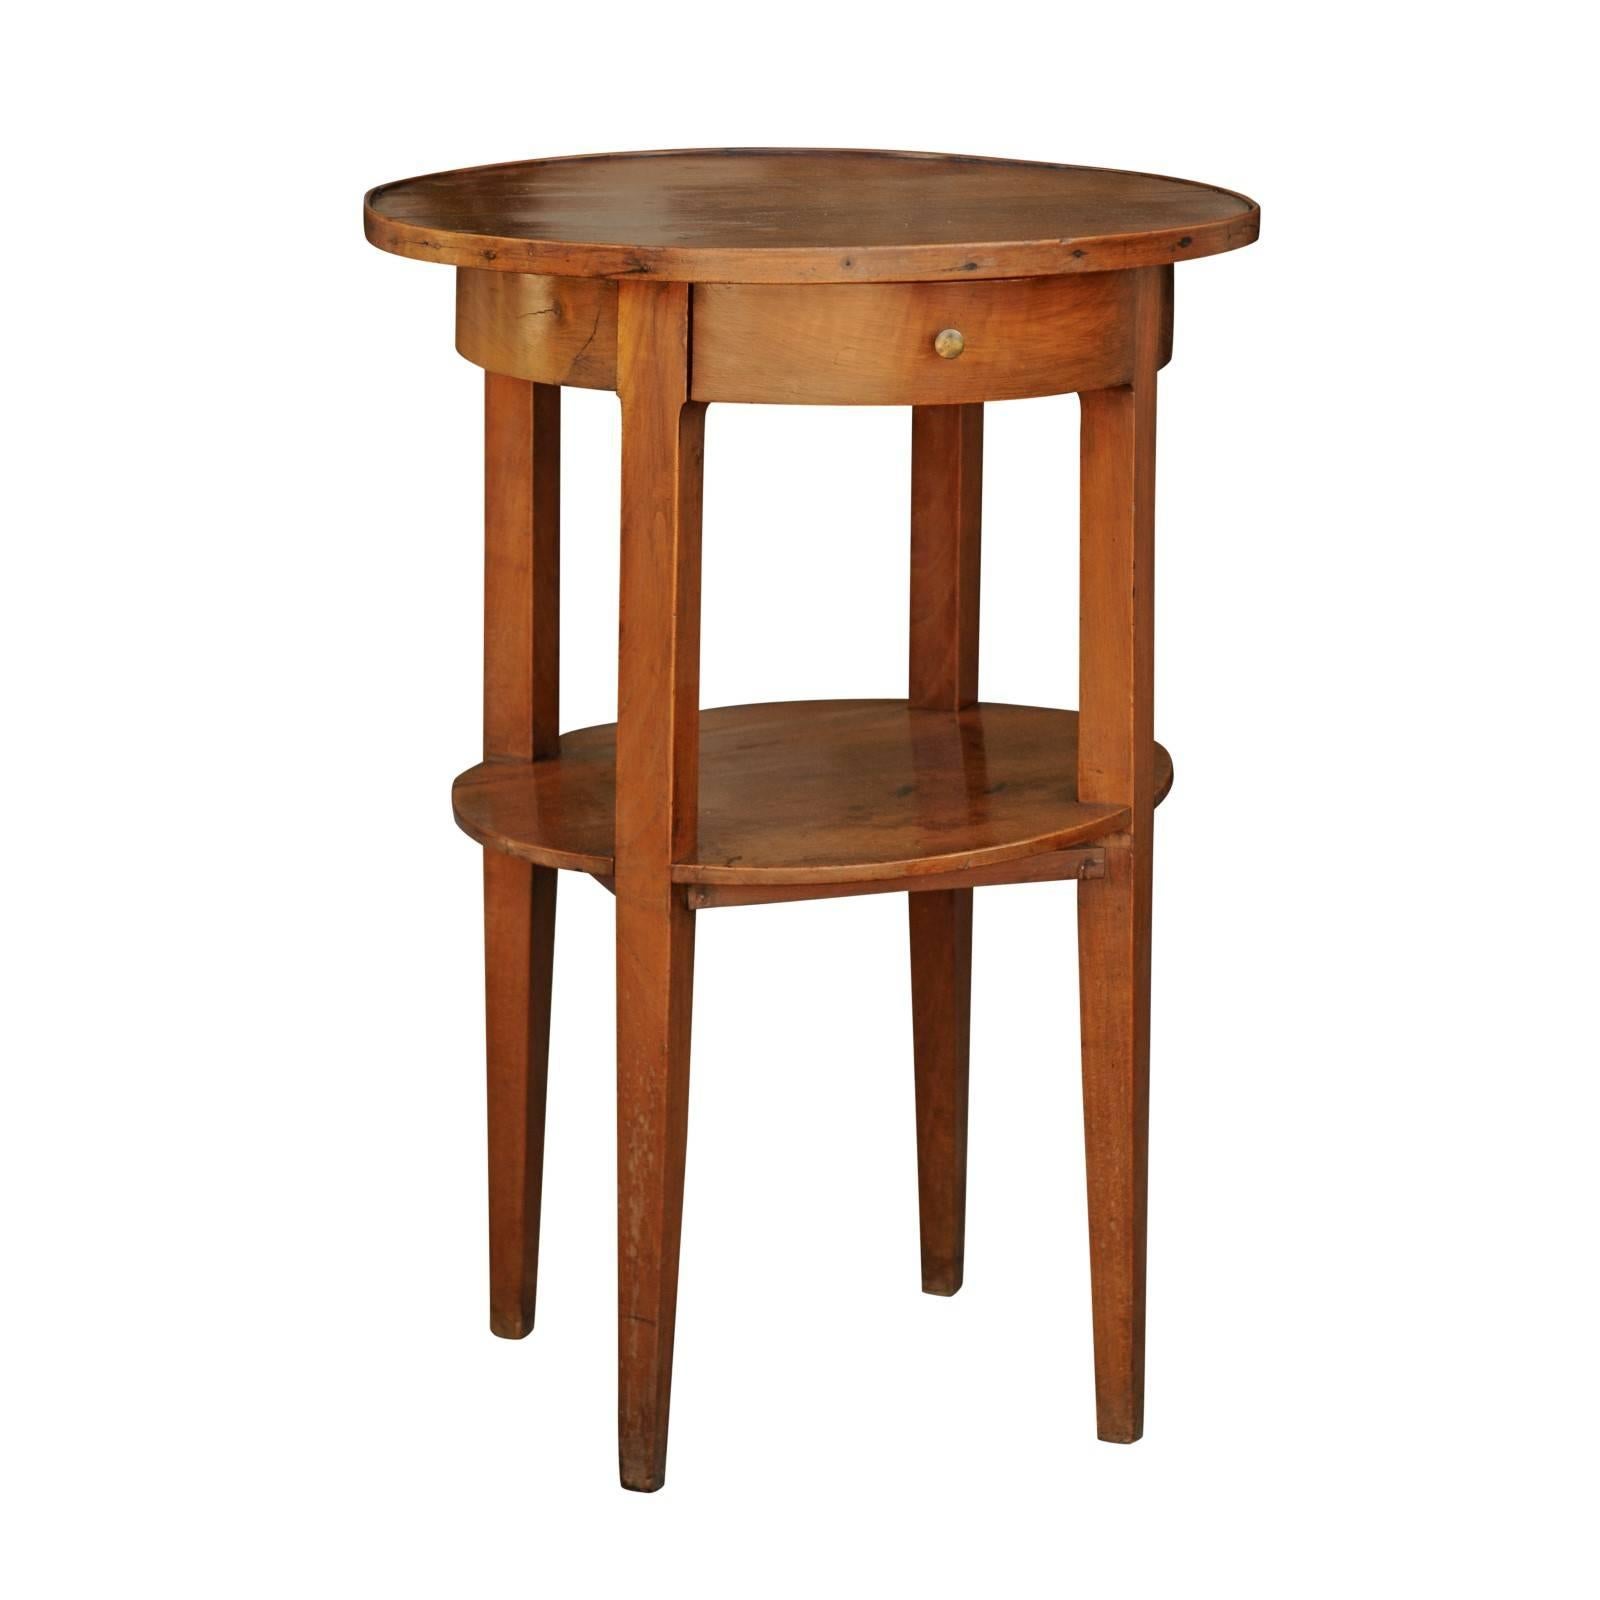 French Circular Side Table with Single Drawer and Lower Shelf from the 1840s